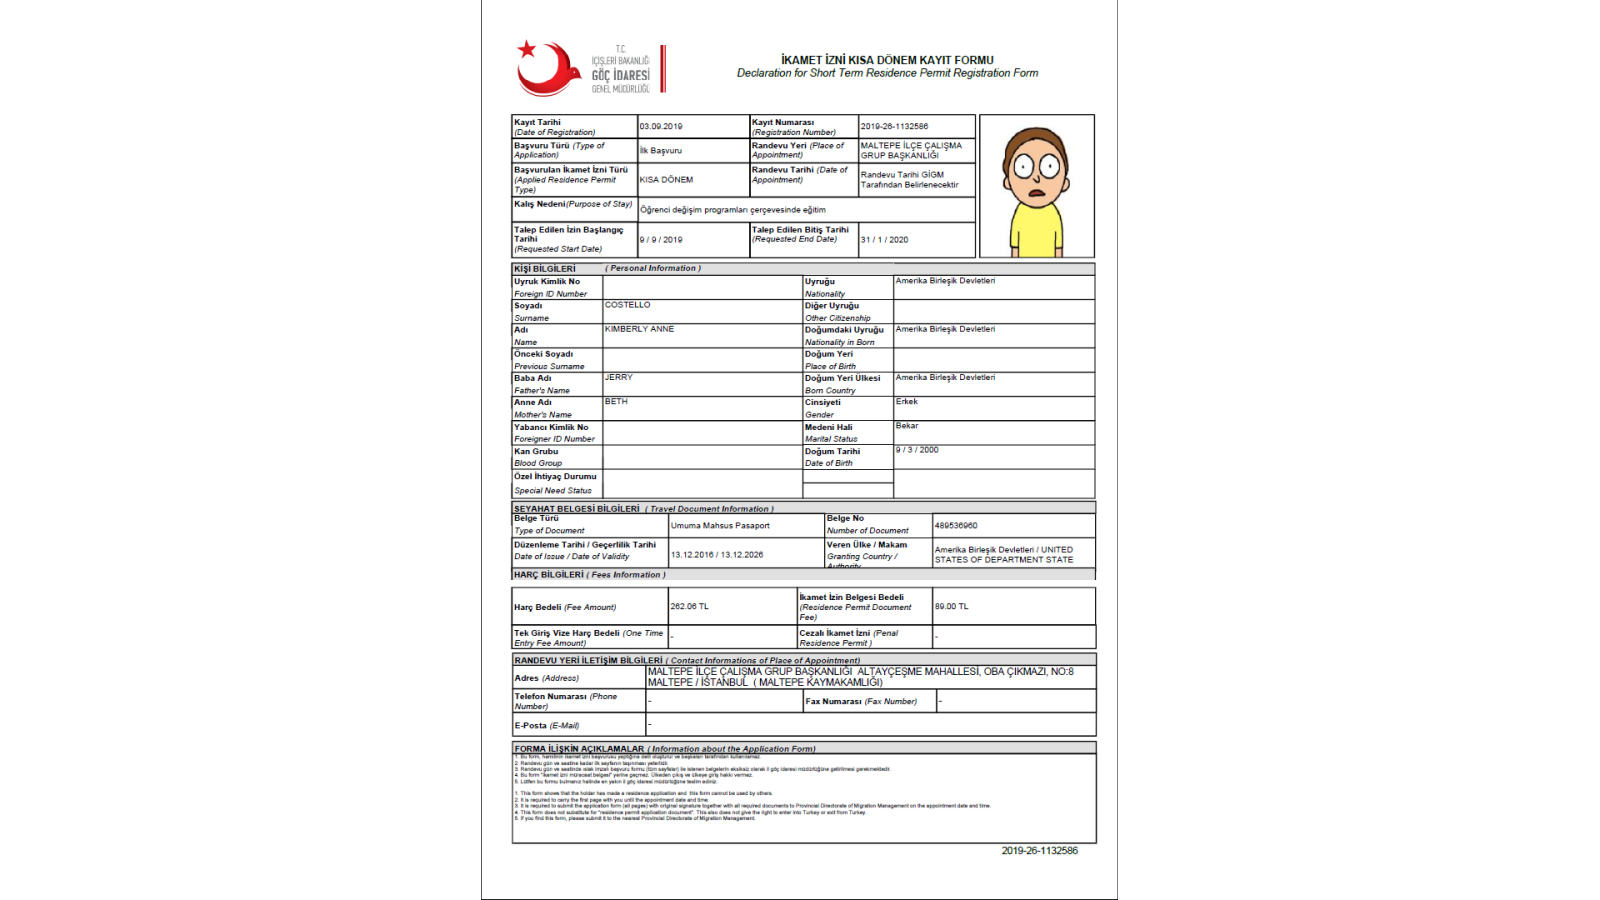 Applying for Turkish Residence Permit - Application form